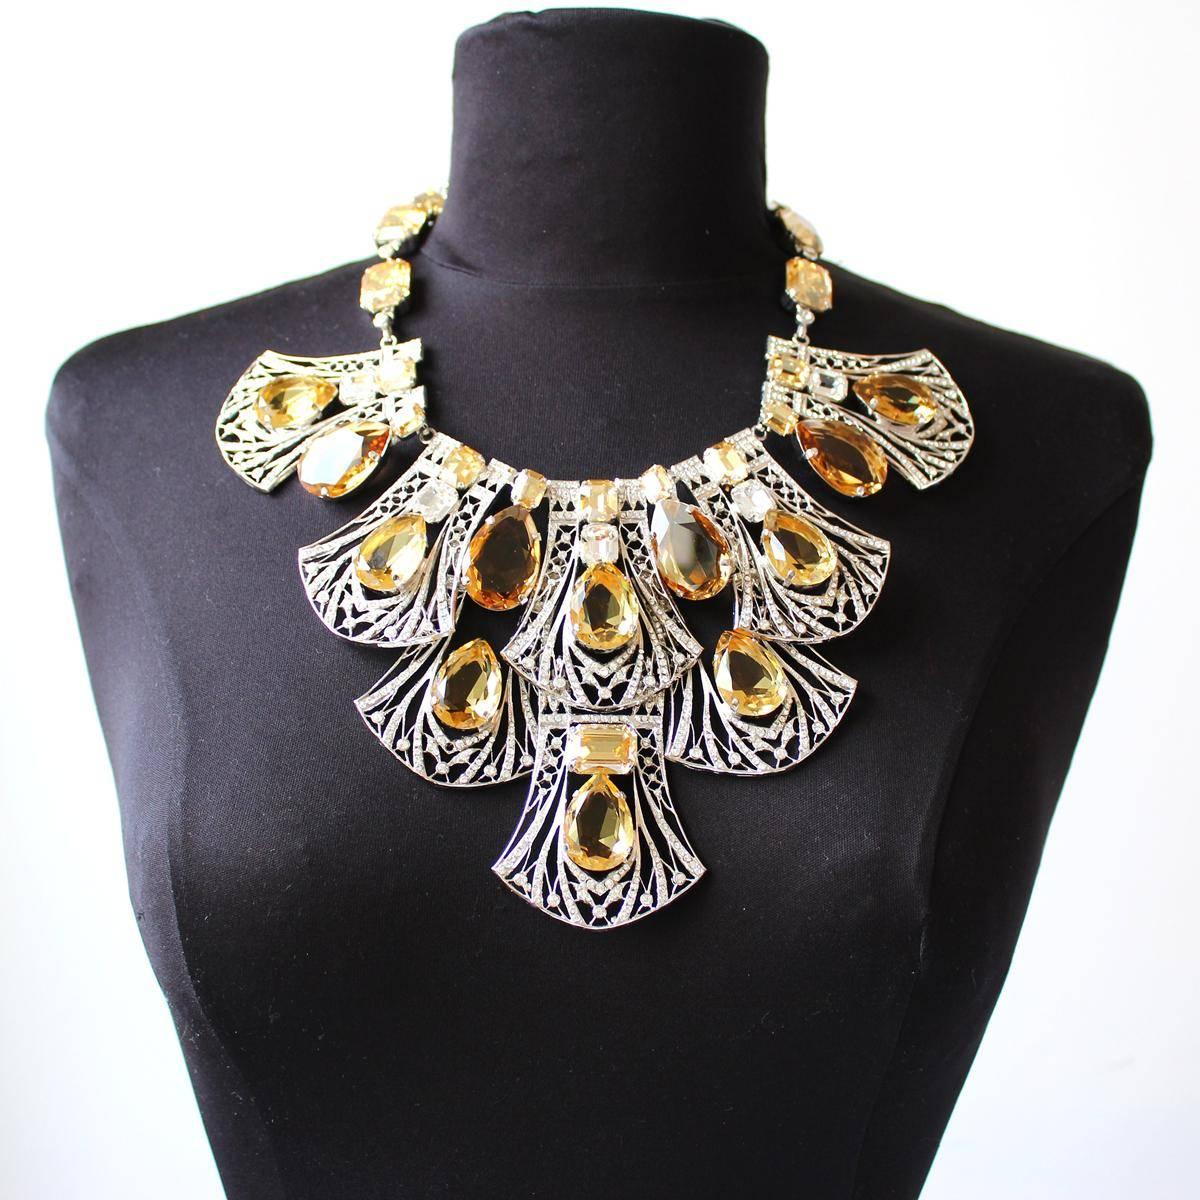 Fantastic masterpiece by Carlo Zini
One of the world greatest bijoux designers
Large collier
Stunning construction of topaze like elements and swarovski crystals
Non allergenic metal, worked with rhodium
100% Artisanal work, made in Milan
Worldwide